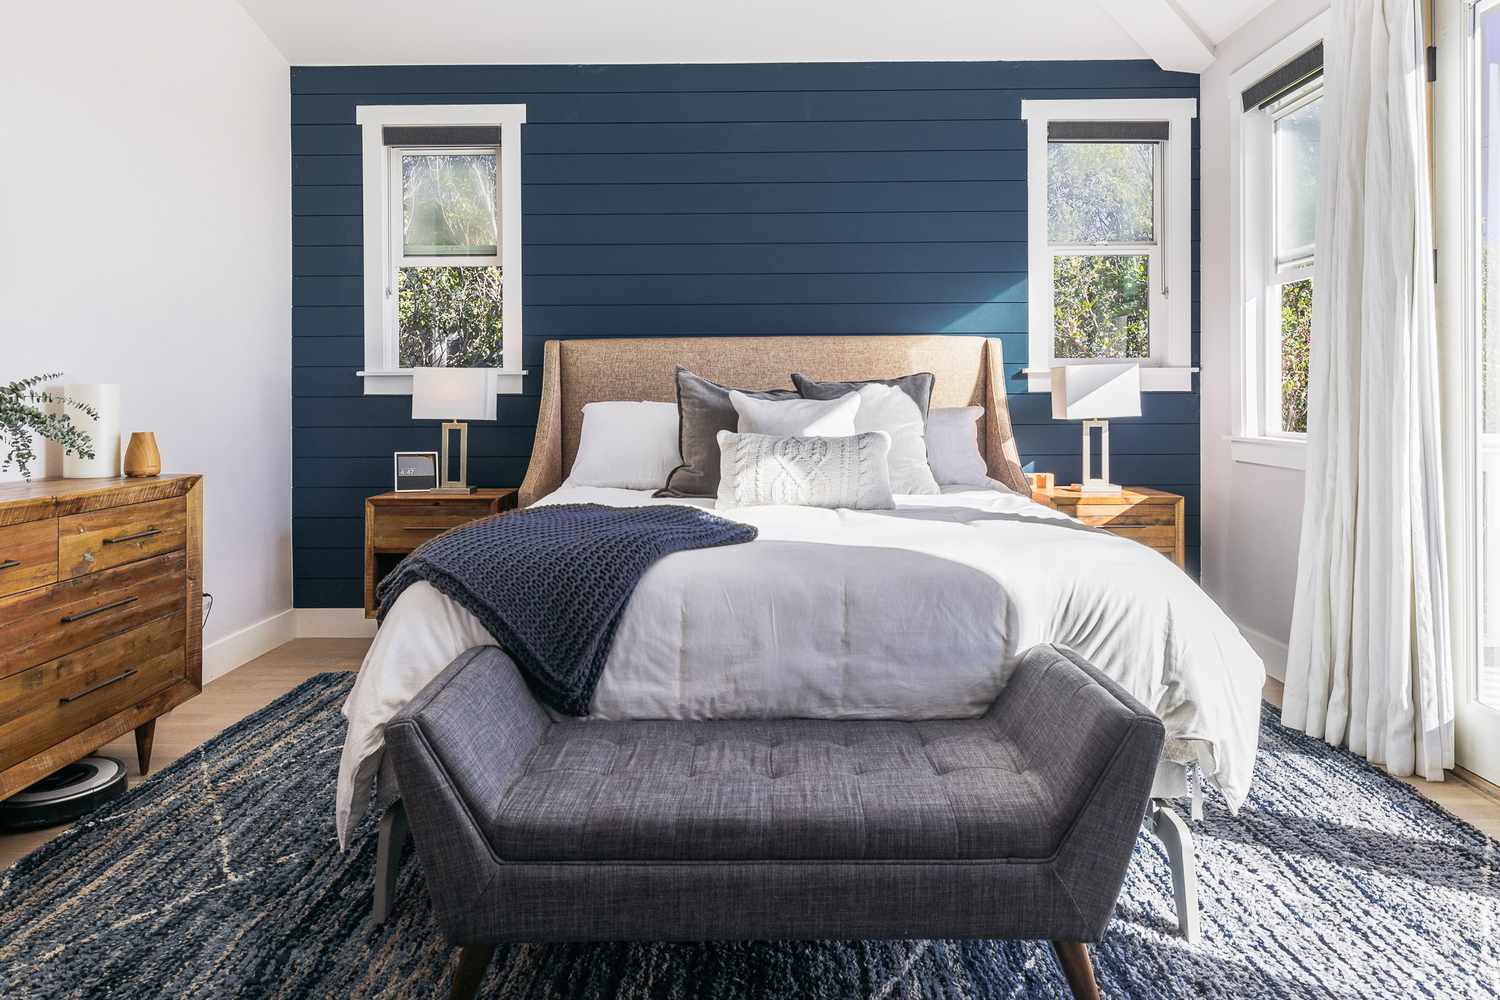 Moody bedroom with blue shiplap walls, blue and gray bedding and gray bench in front